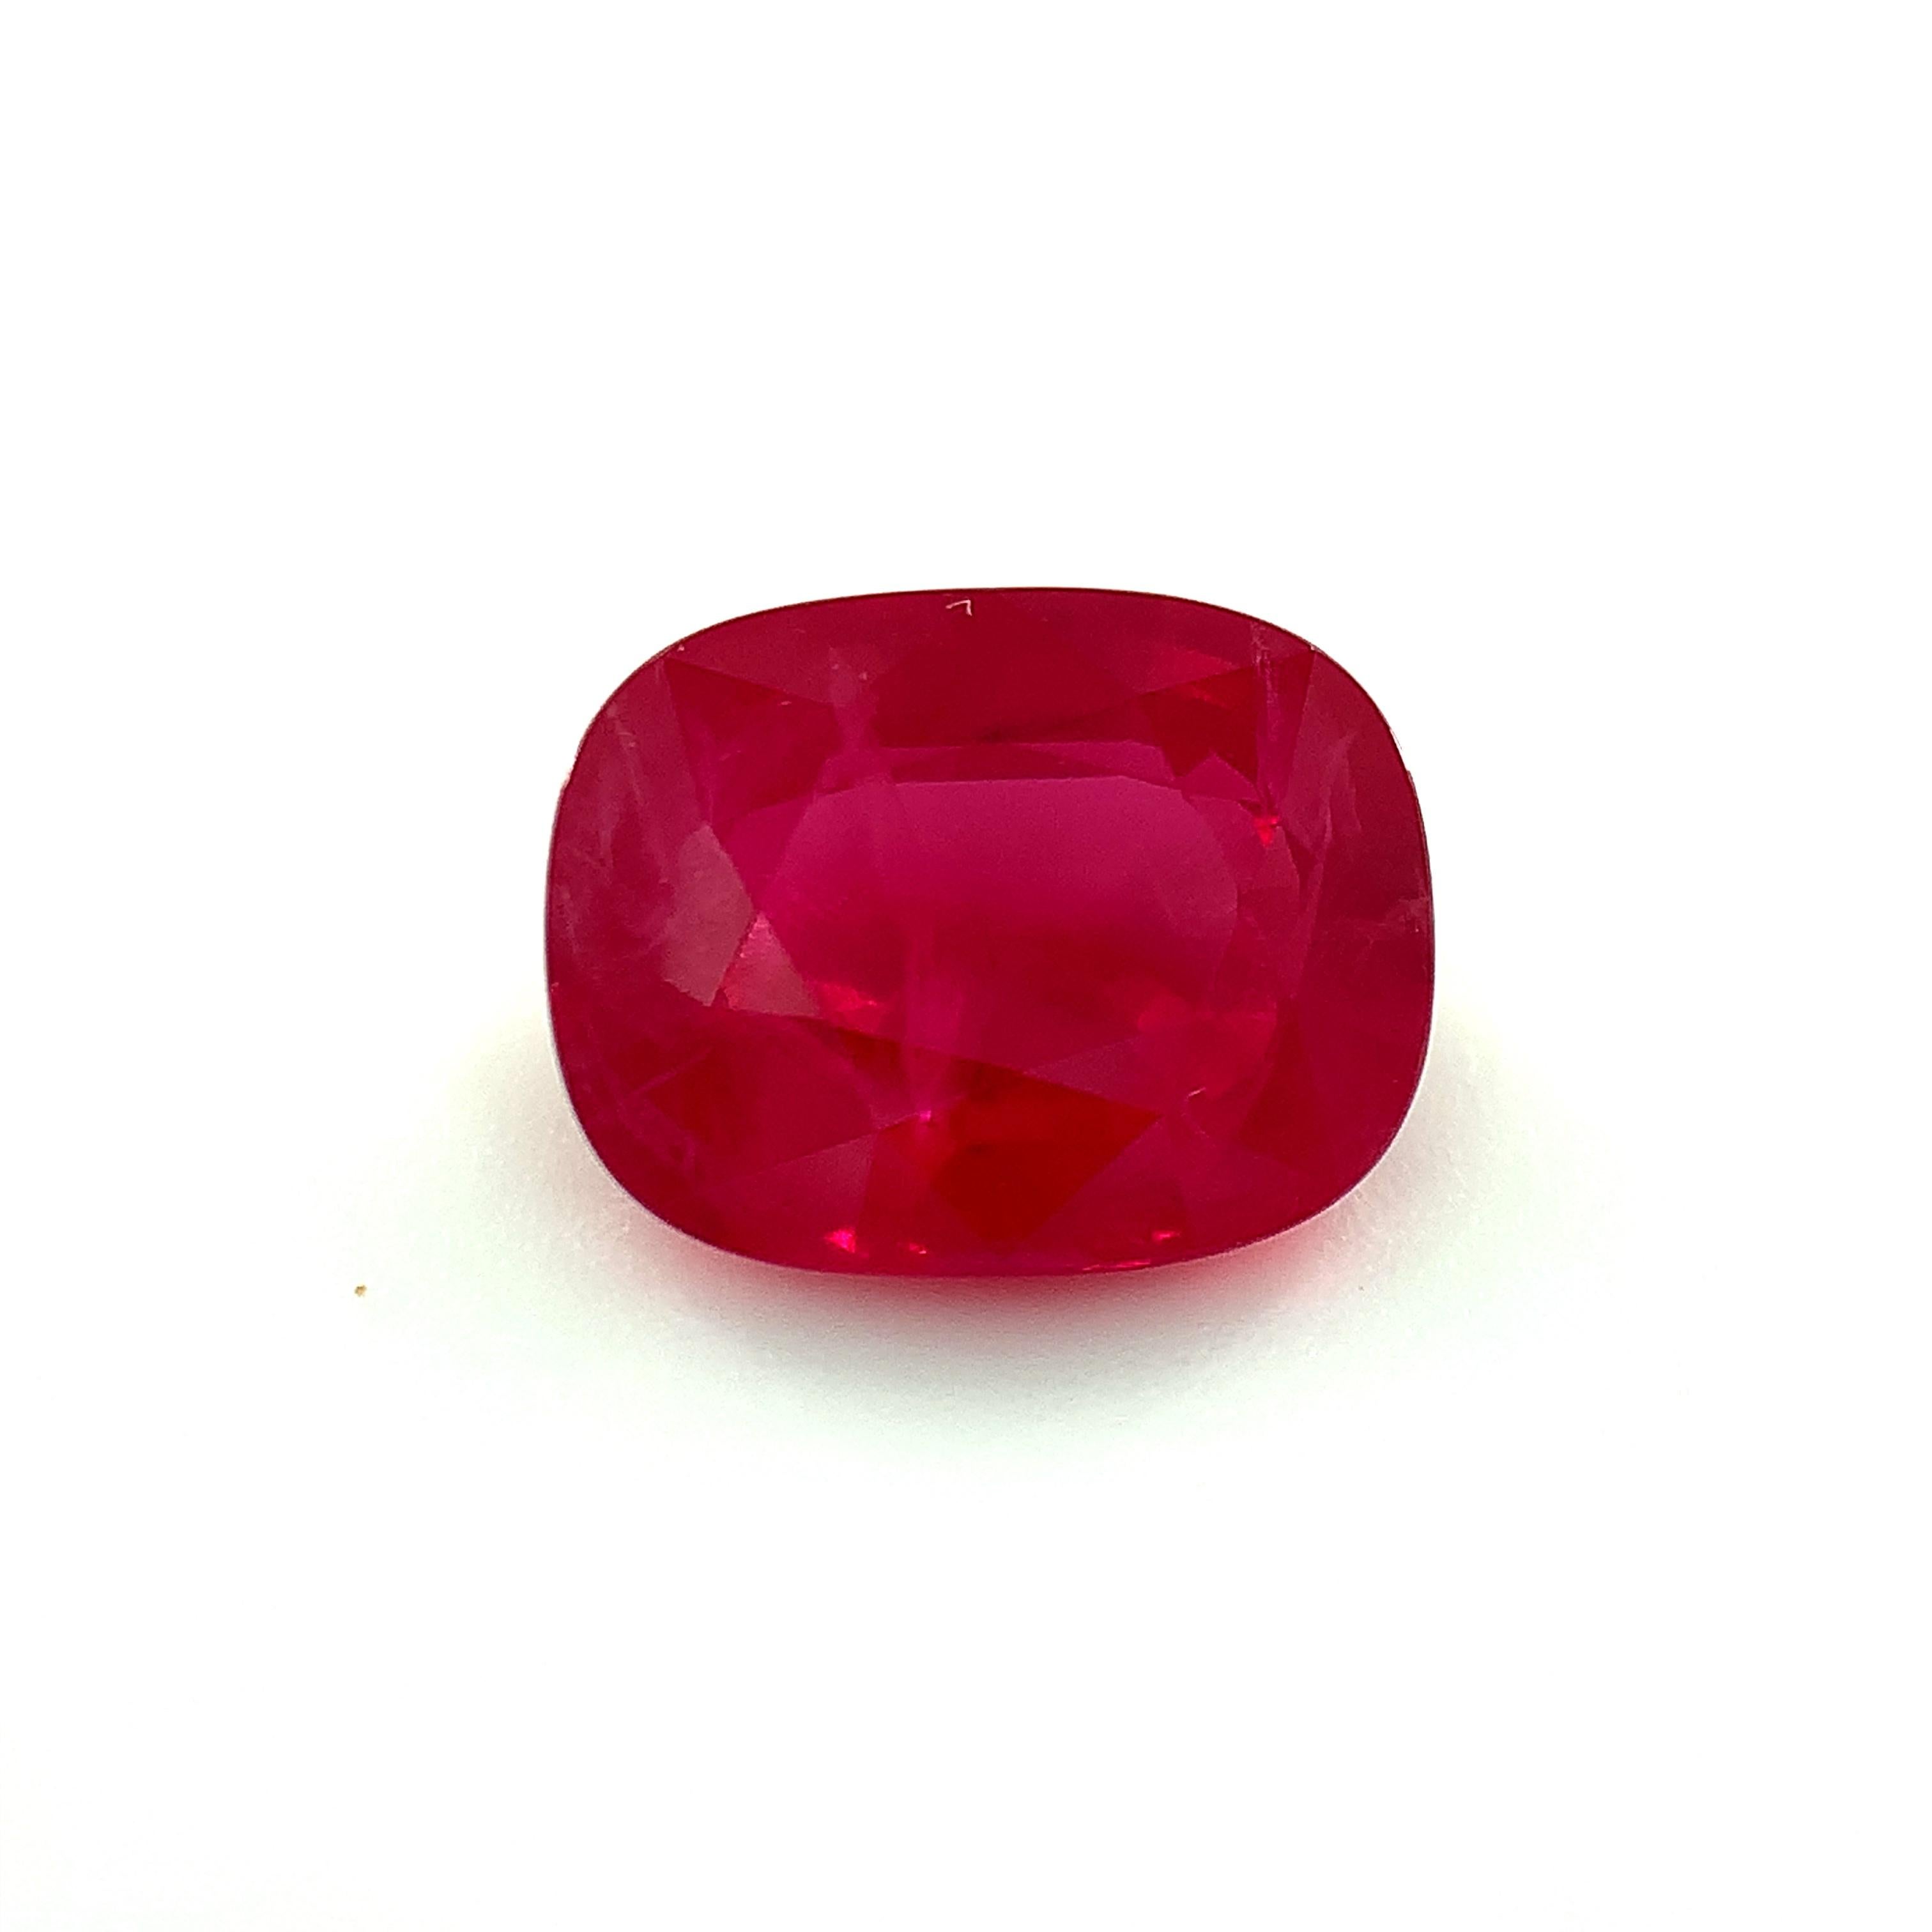 This 3.11 carat Burmese ruby has exceptional pure red color, described as 